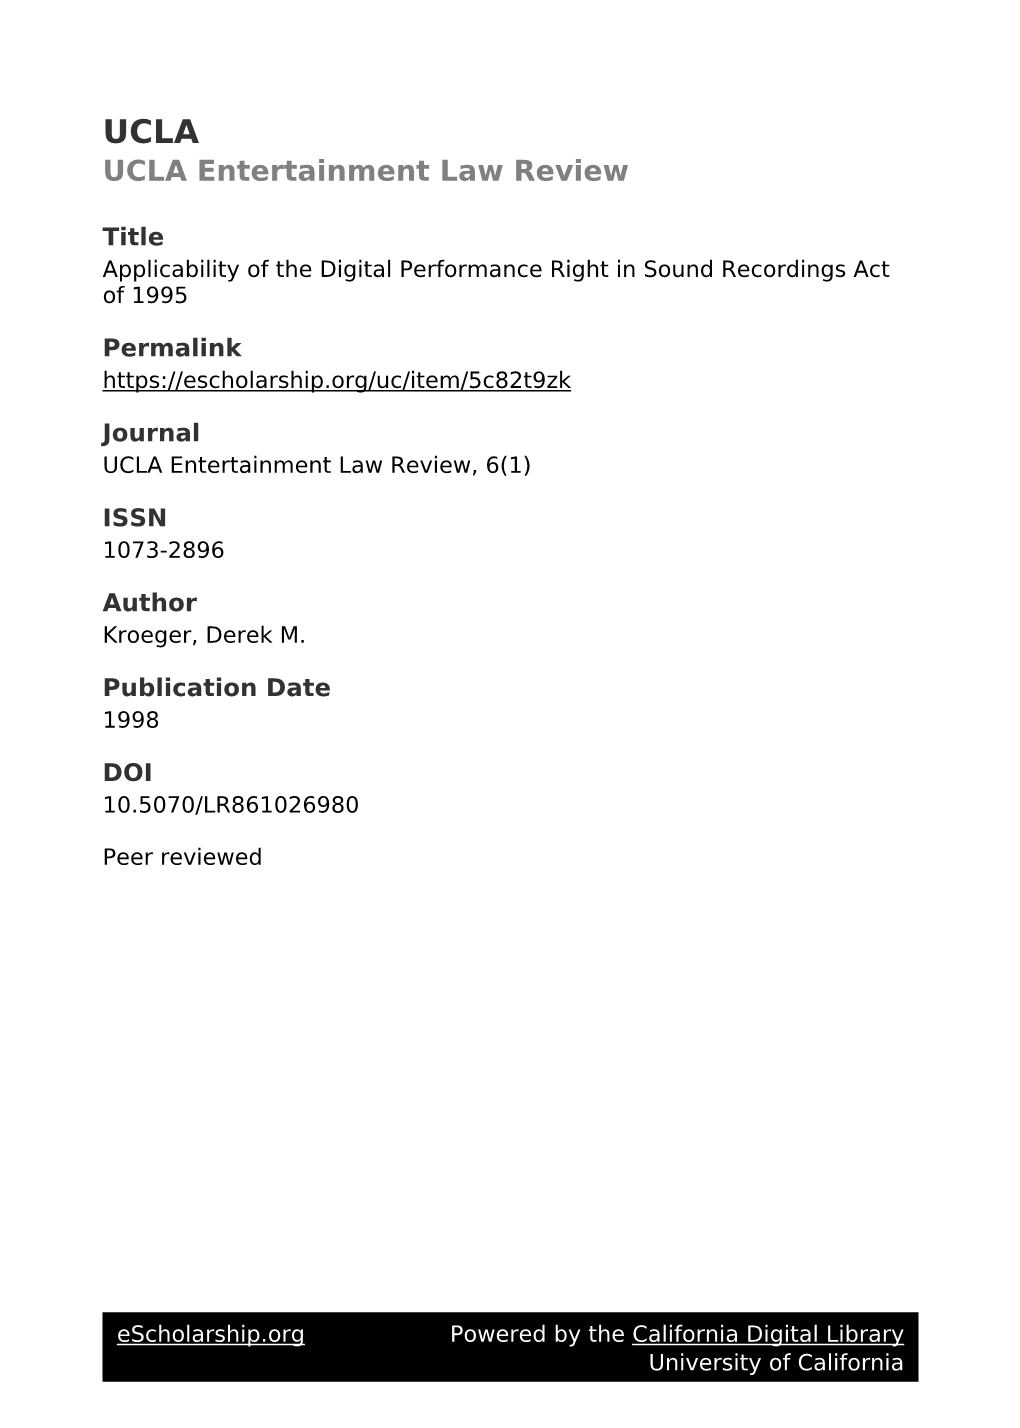 Applicability of the Digital Performance Right in Sound Recordings Act of 1995